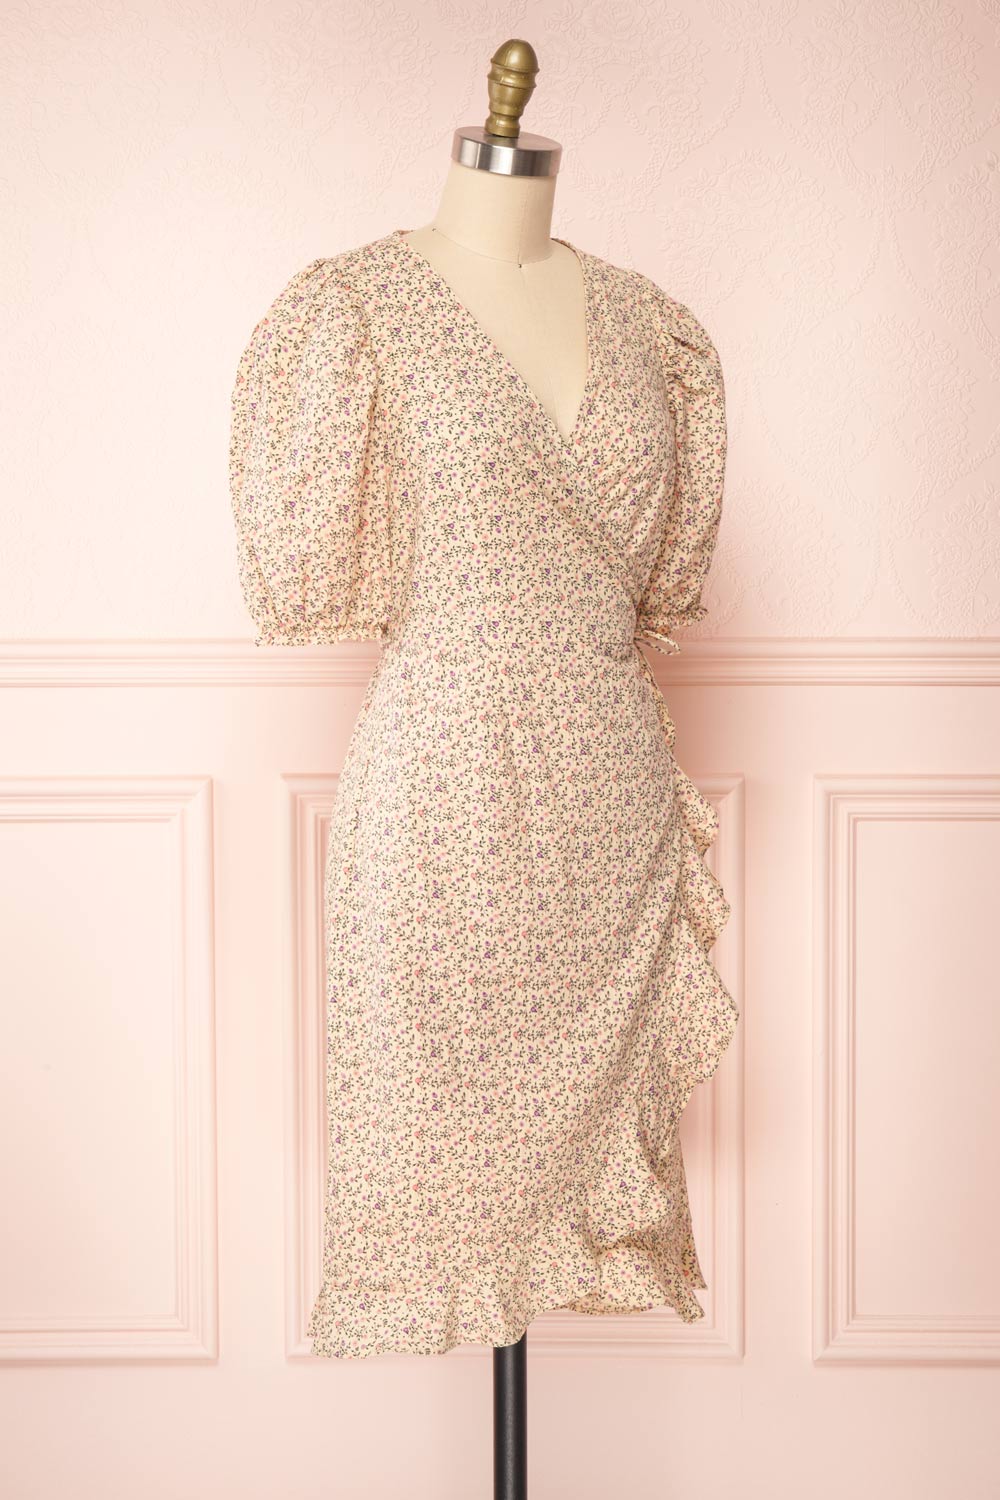 Xinqian Beige Floral Wrap Dress w/ Puffy Sleeves | Boutique 1861 side view